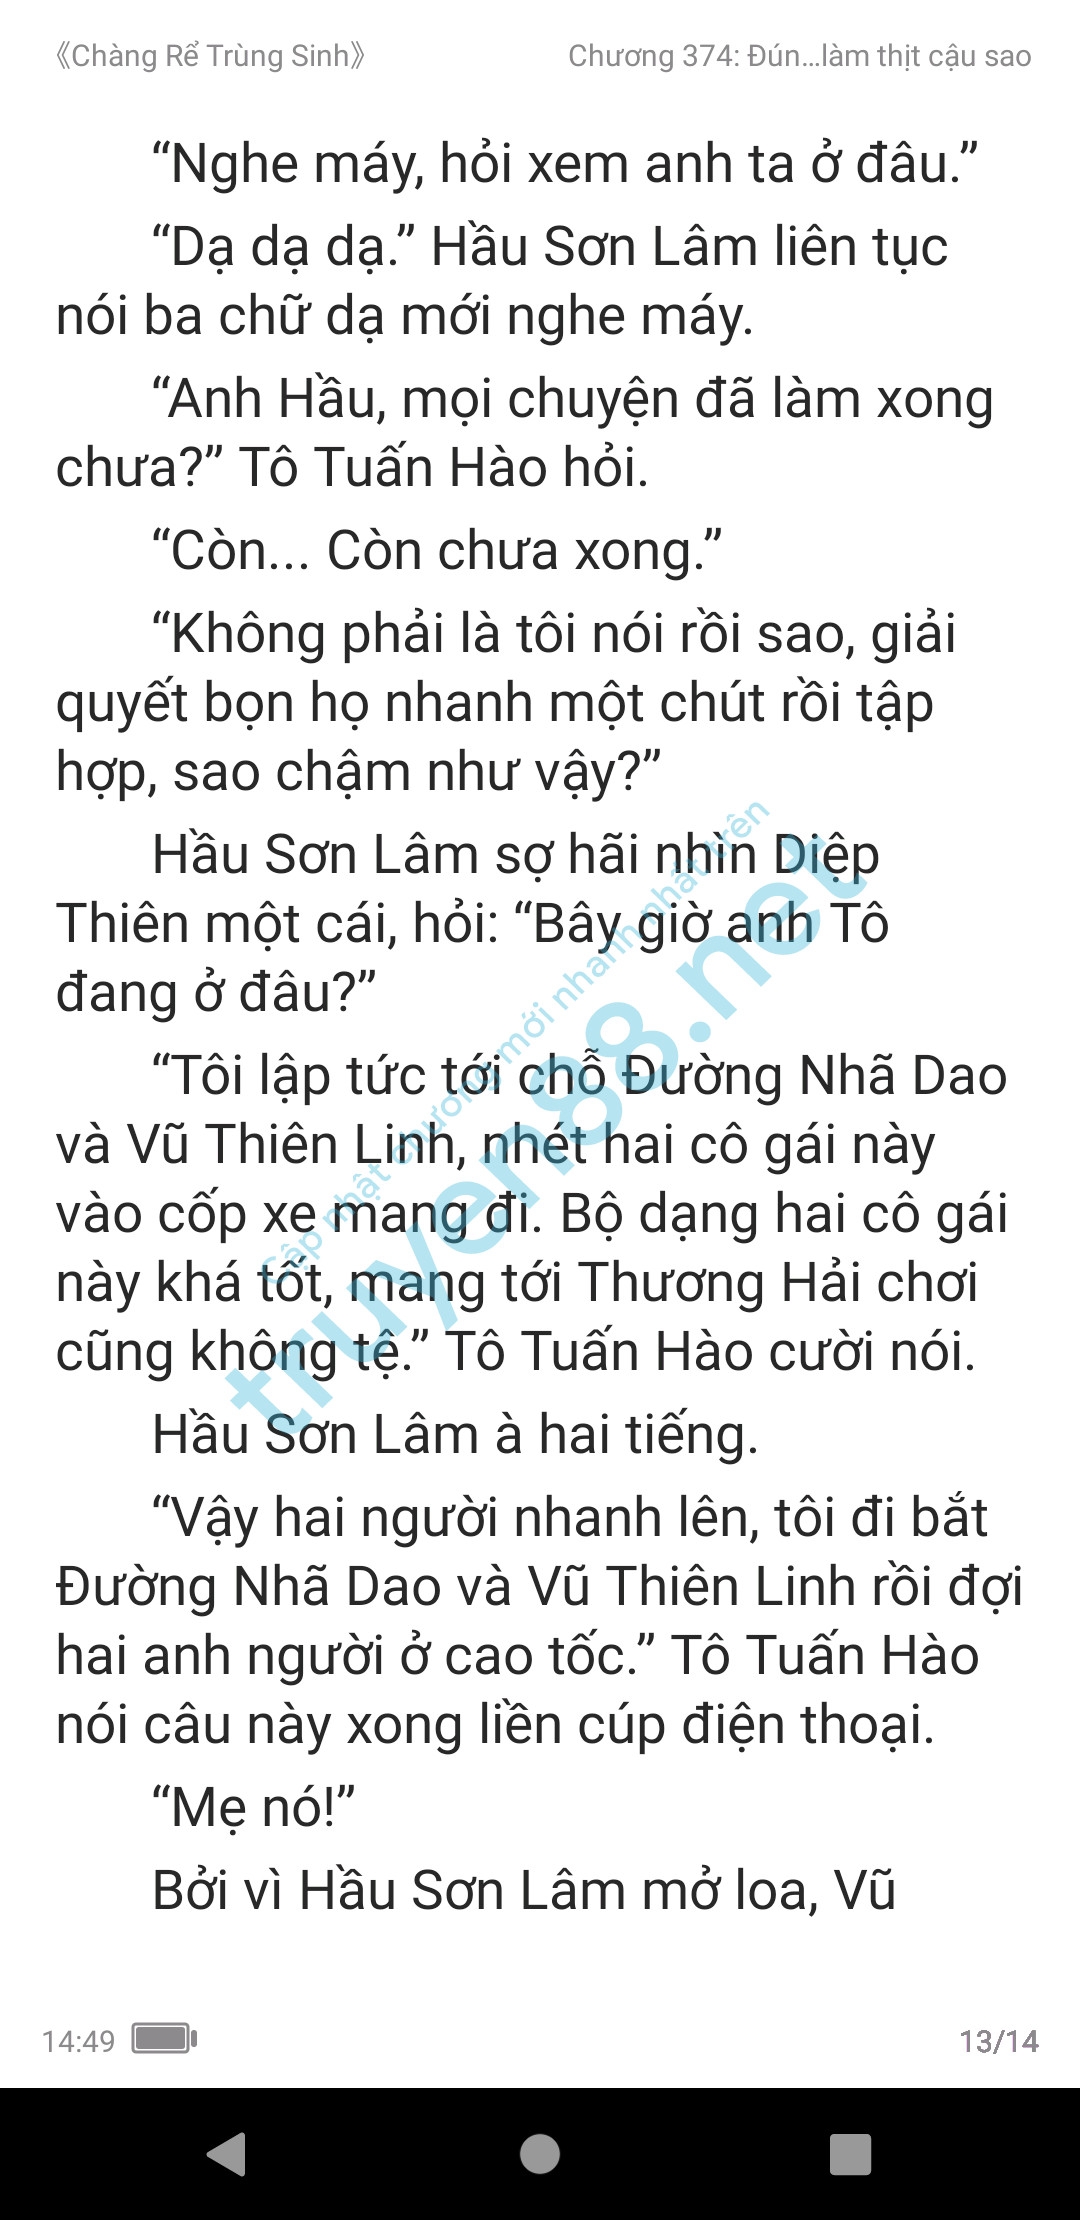 chang-re-trung-sinh-374-0